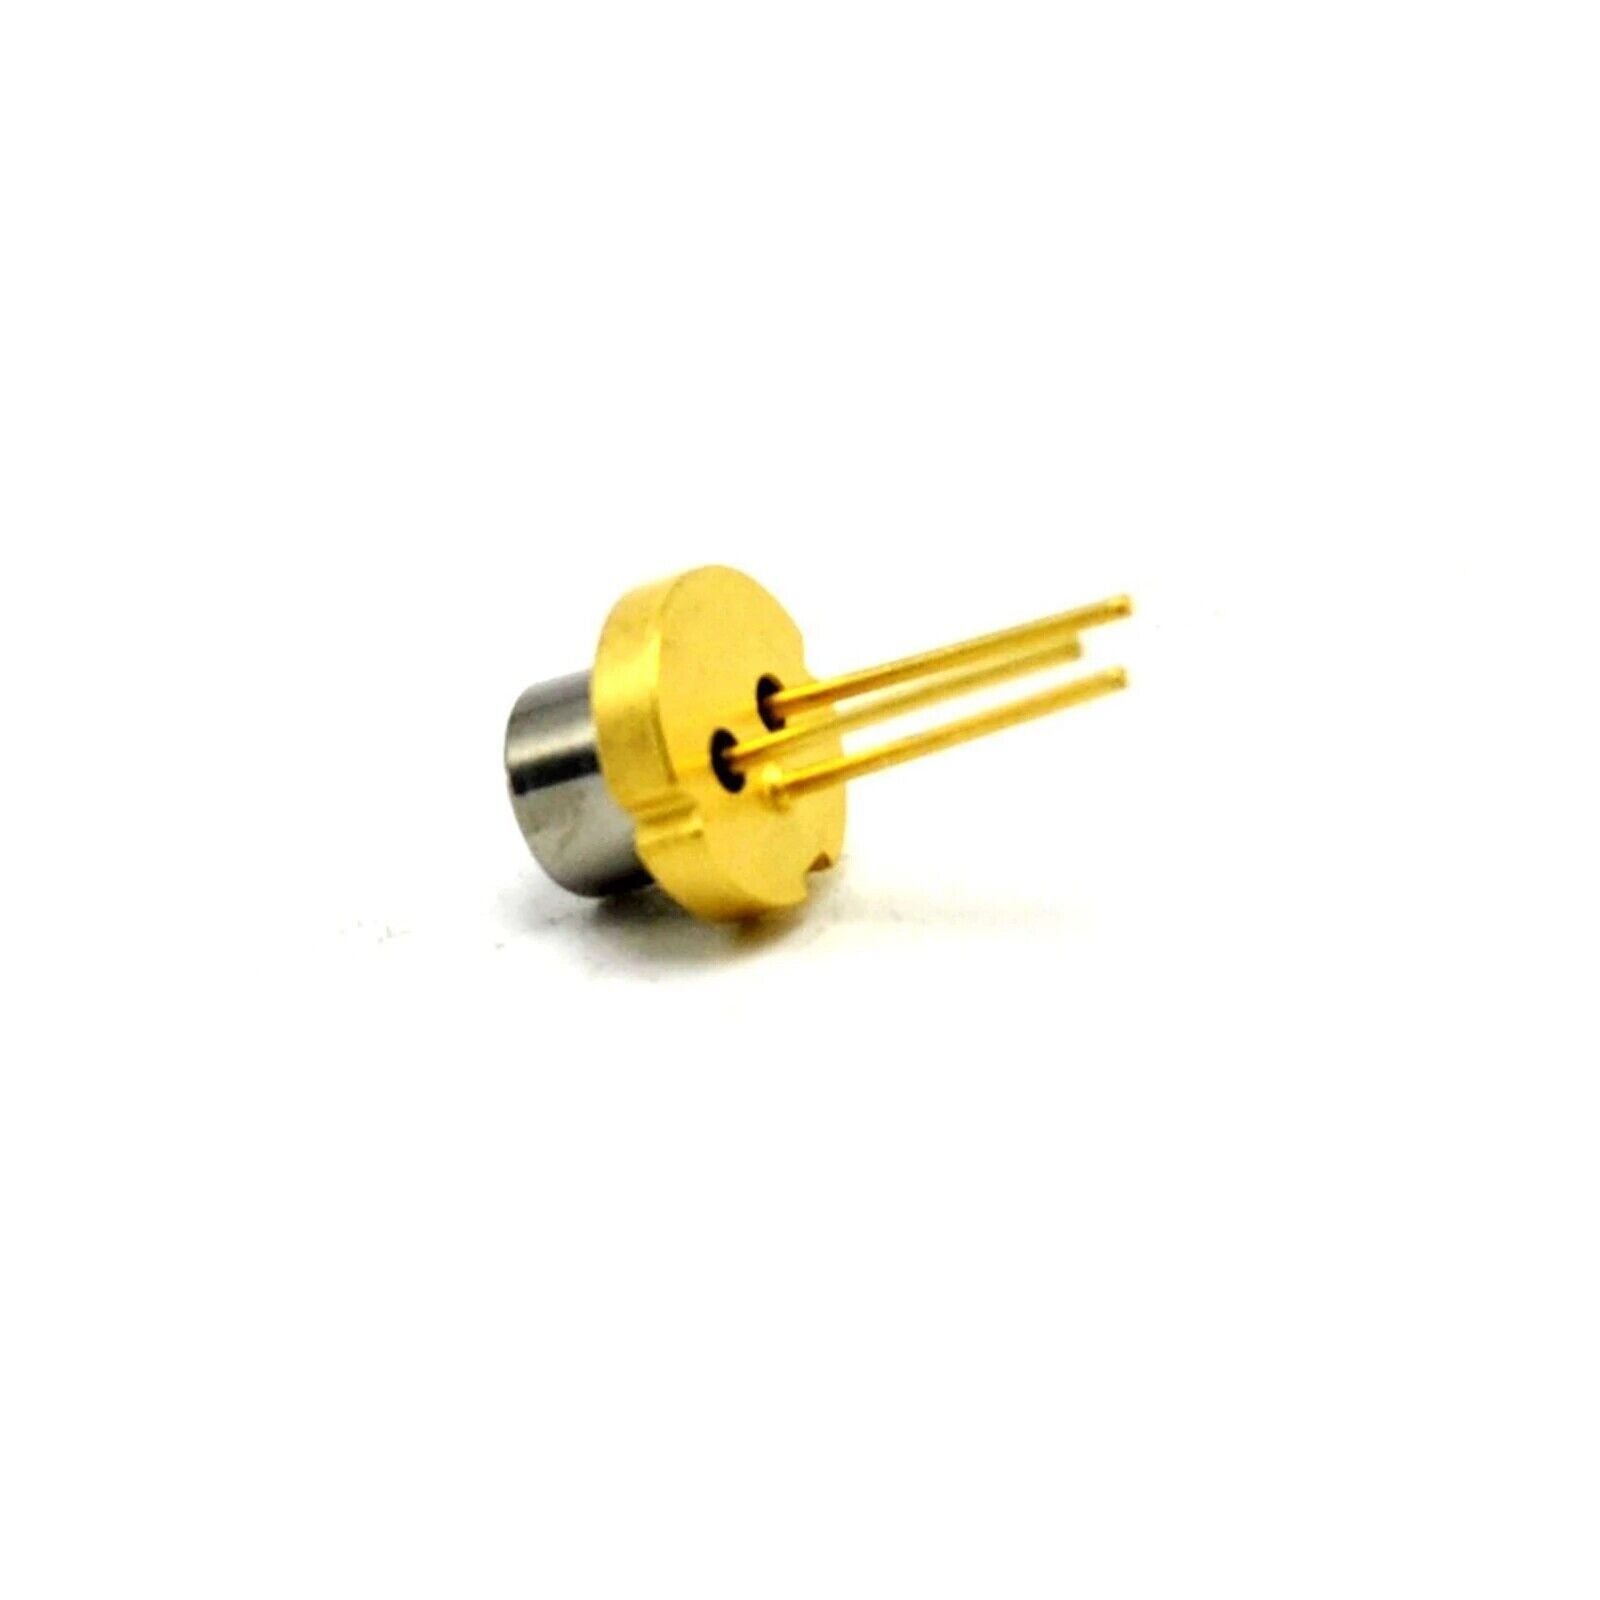 Ushio HL6501MG-A 658nm 35mw Red Laser Diode